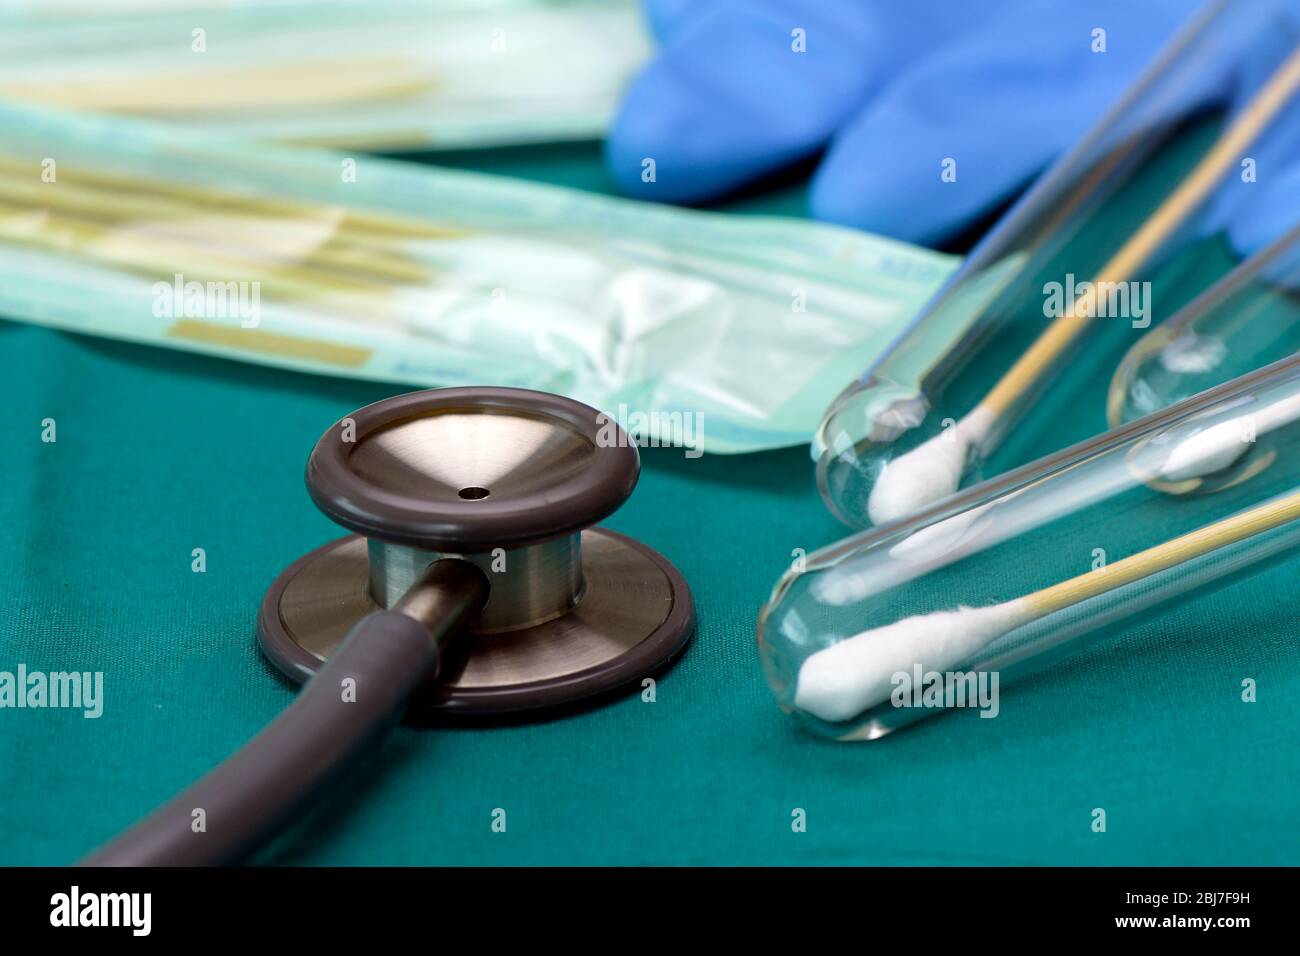 Most tests for the new strain of coronavirus involve taking a swab sample for analysis. Stock Photo